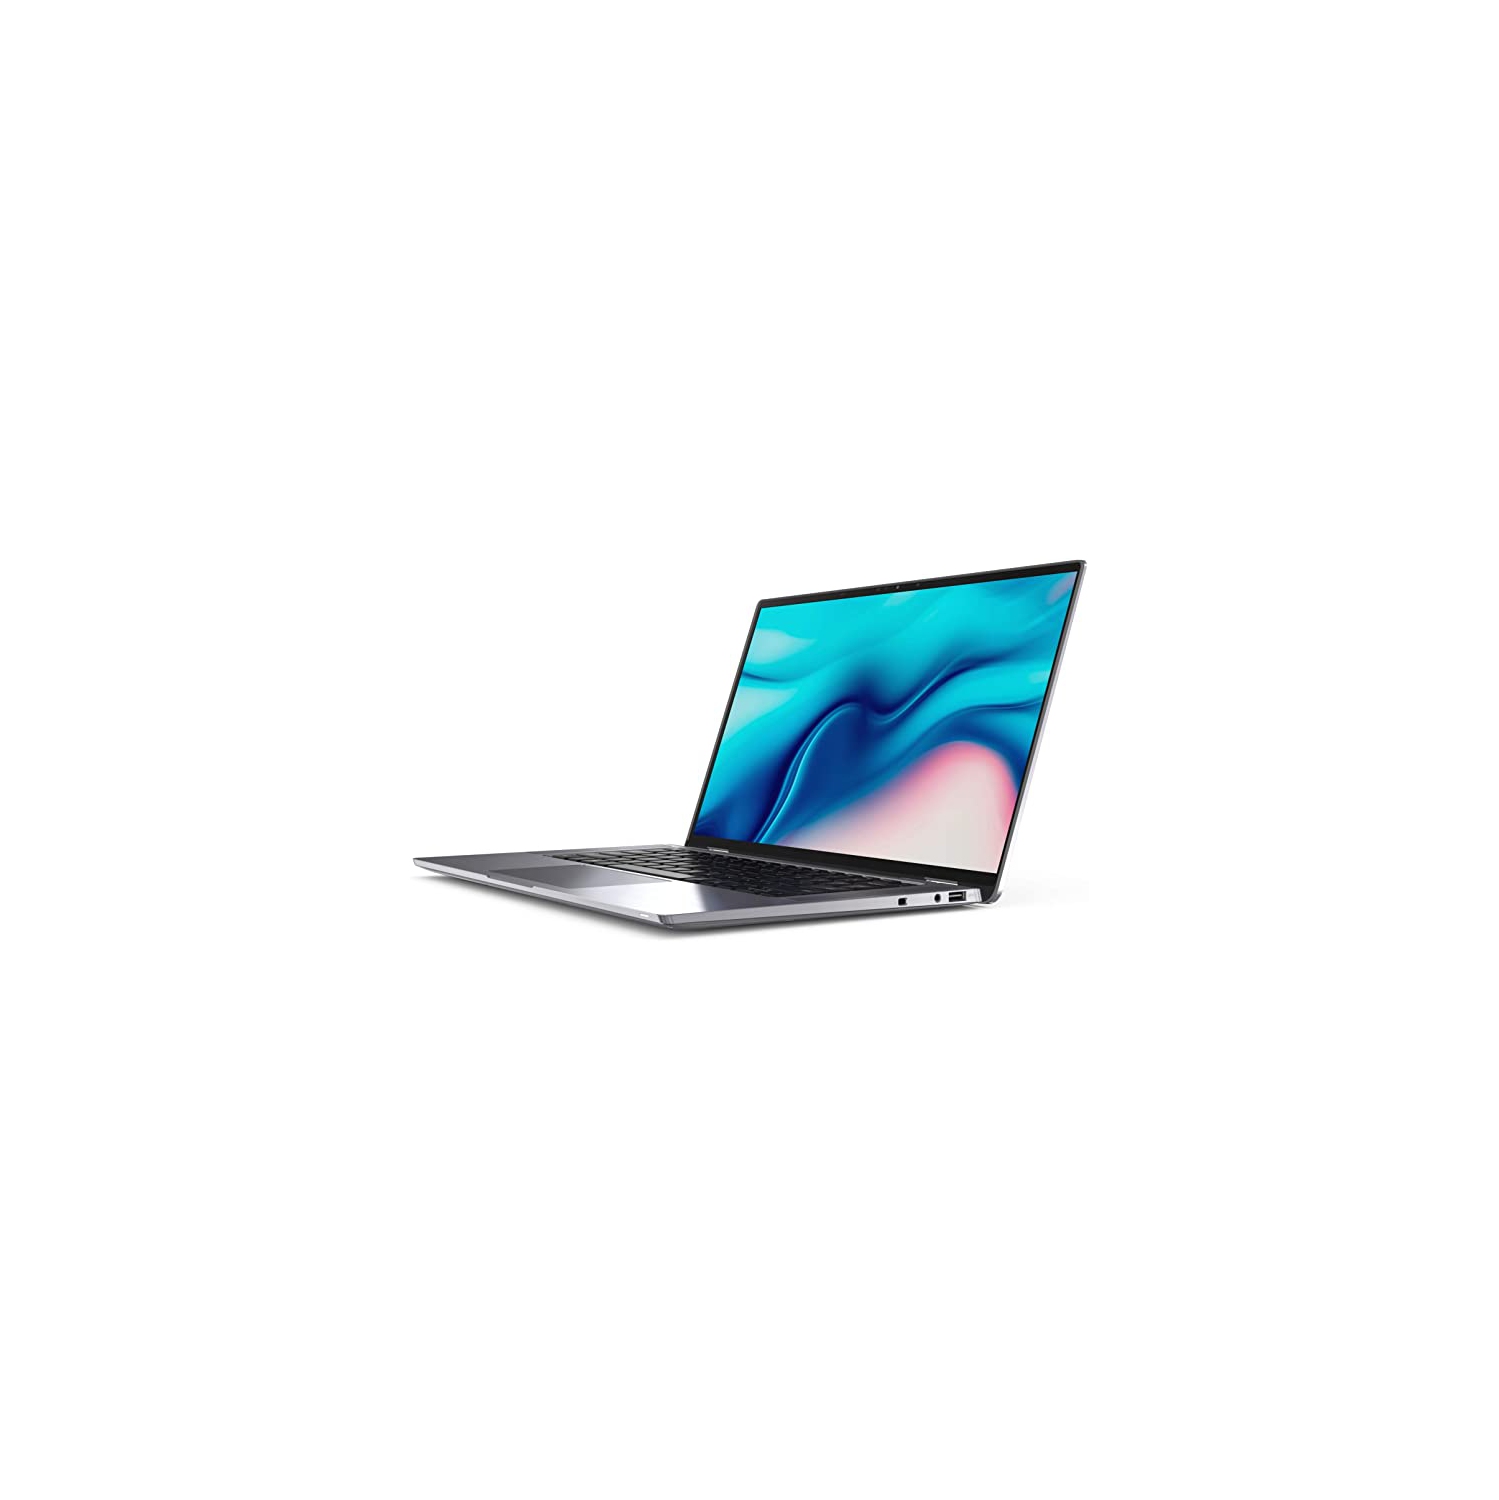 Refurbished (Excellent) - Dell Latitude 9000 9510 Laptop (2020) | 15.6" FHD | Core i7 - 1TB SSD - 16GB RAM | 6 Cores @ 4.7 GHz - 10th Gen CPU Certified Refurbished